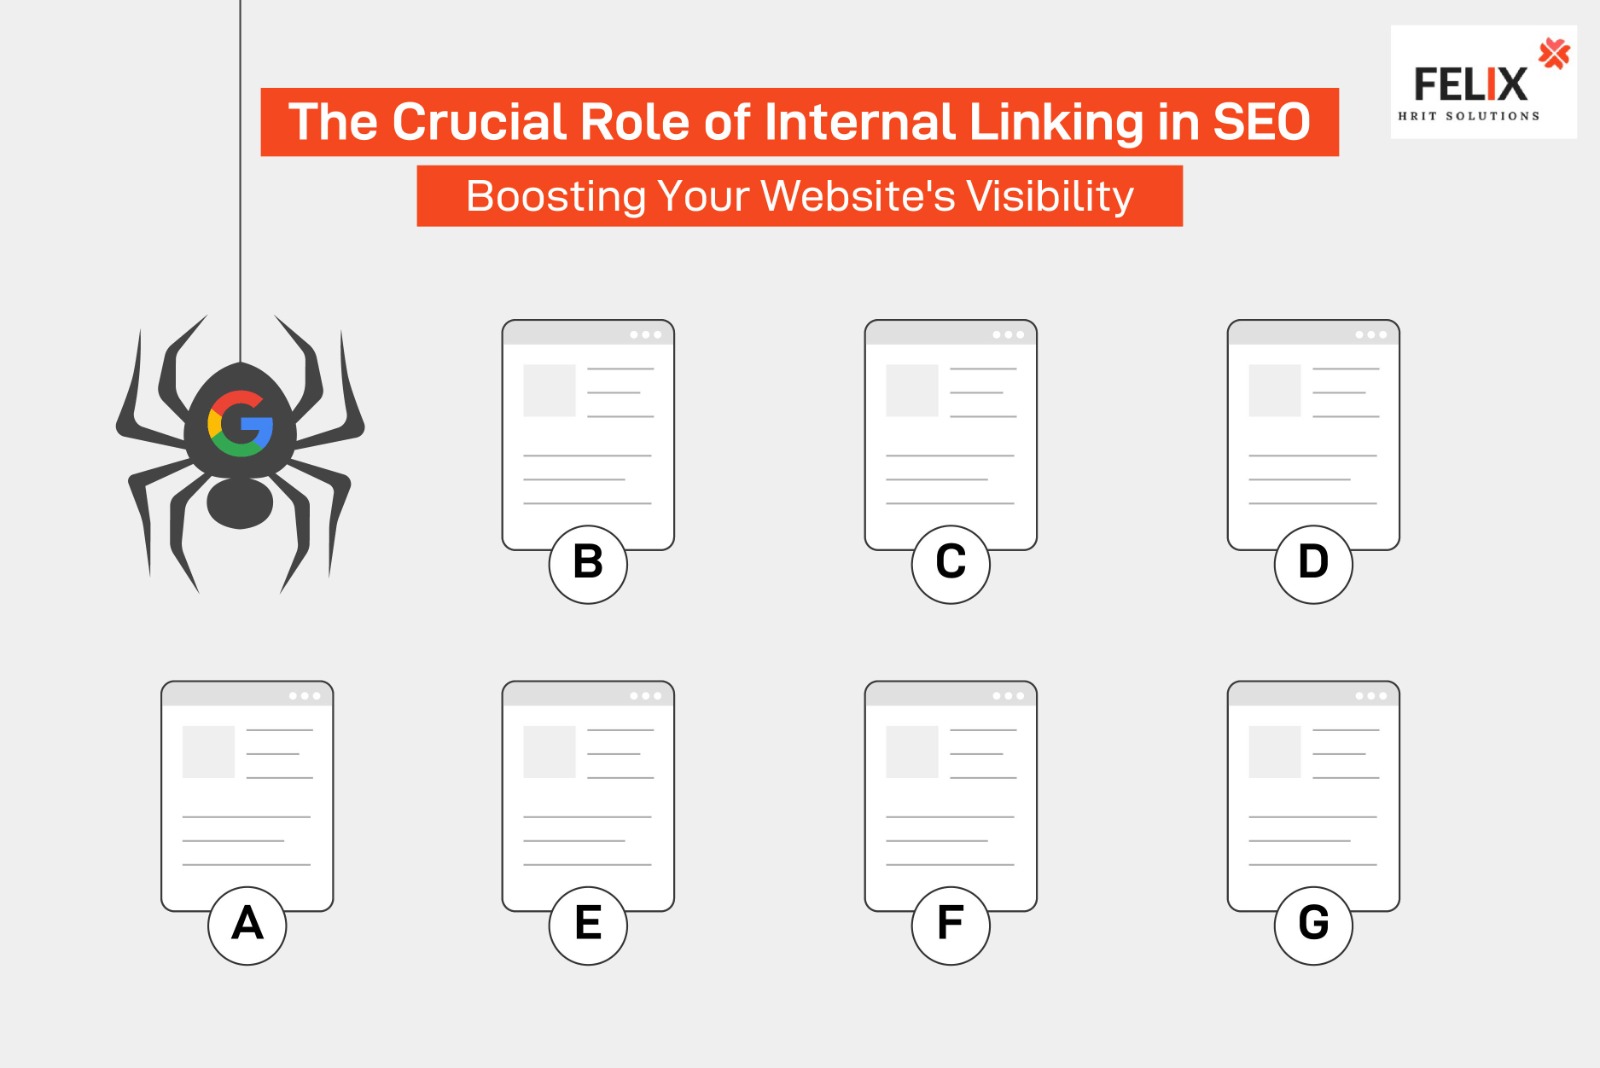 the role of Internal Linking for SEO